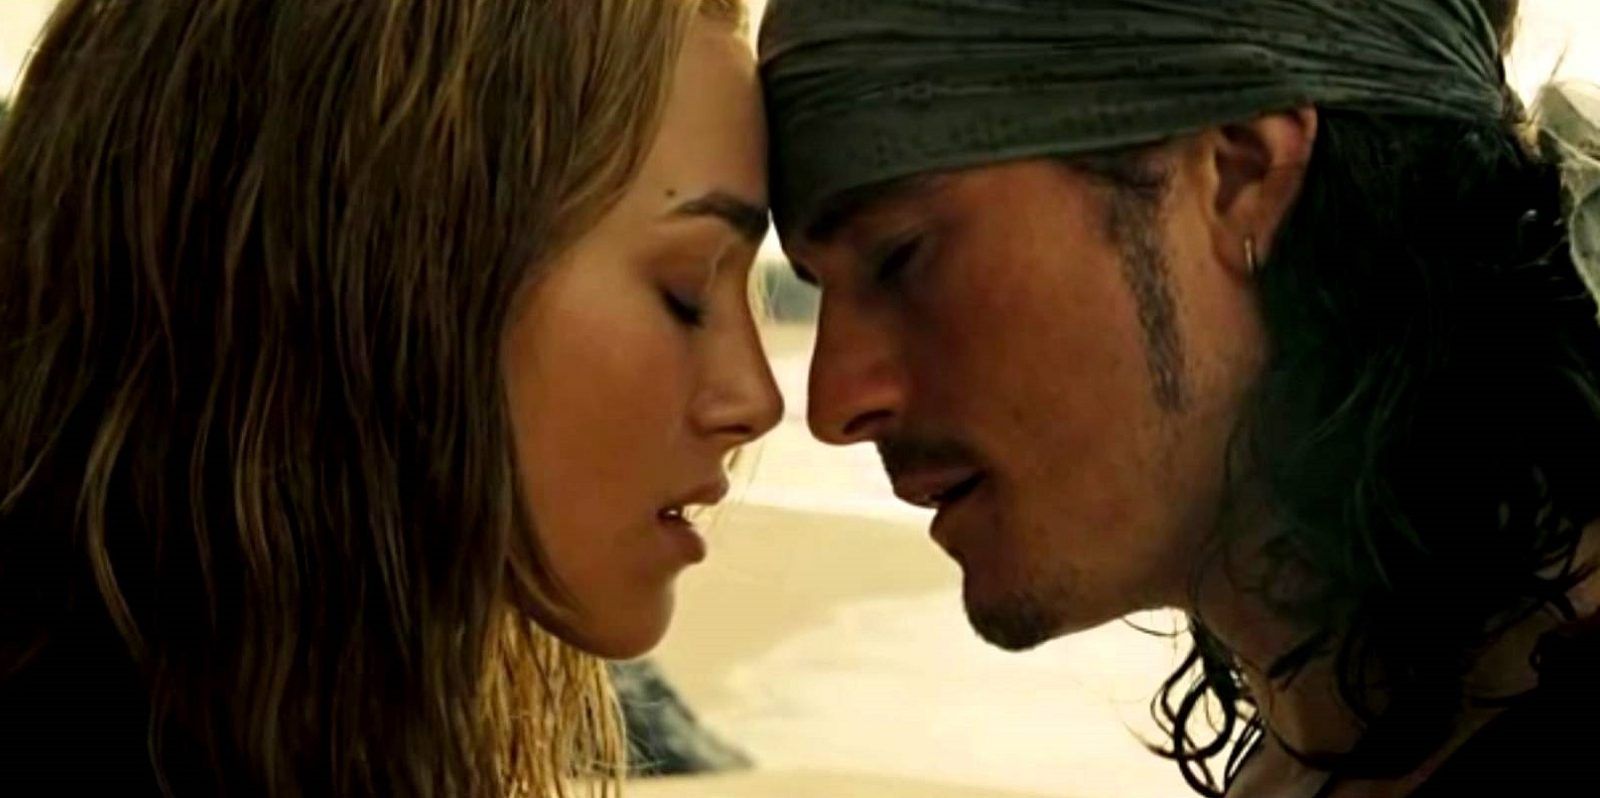 Keira Knightley and Orlando Bloom as Will and Elizabeth - Pirates